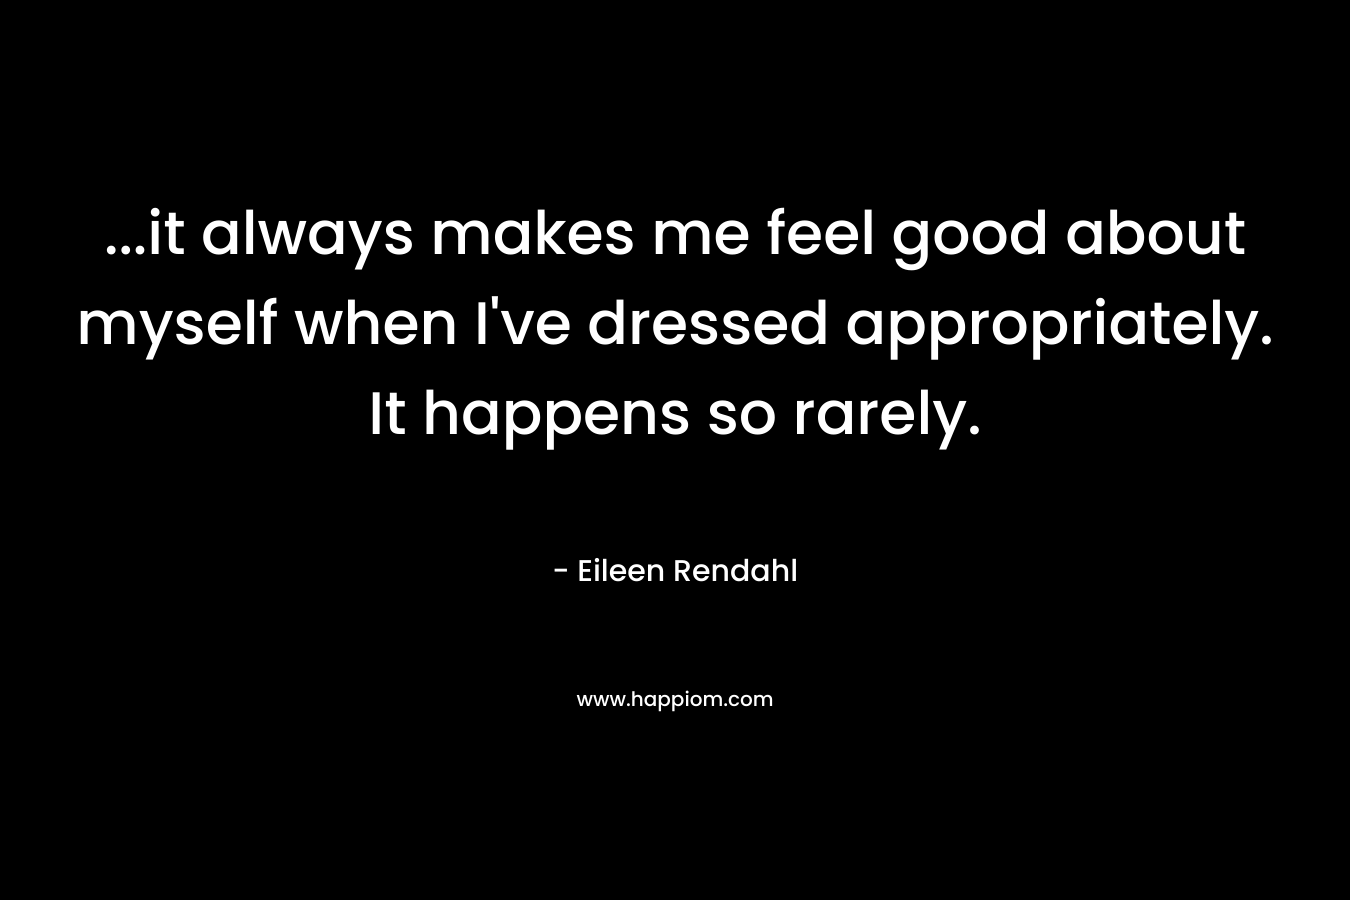 …it always makes me feel good about myself when I’ve dressed appropriately. It happens so rarely. – Eileen Rendahl